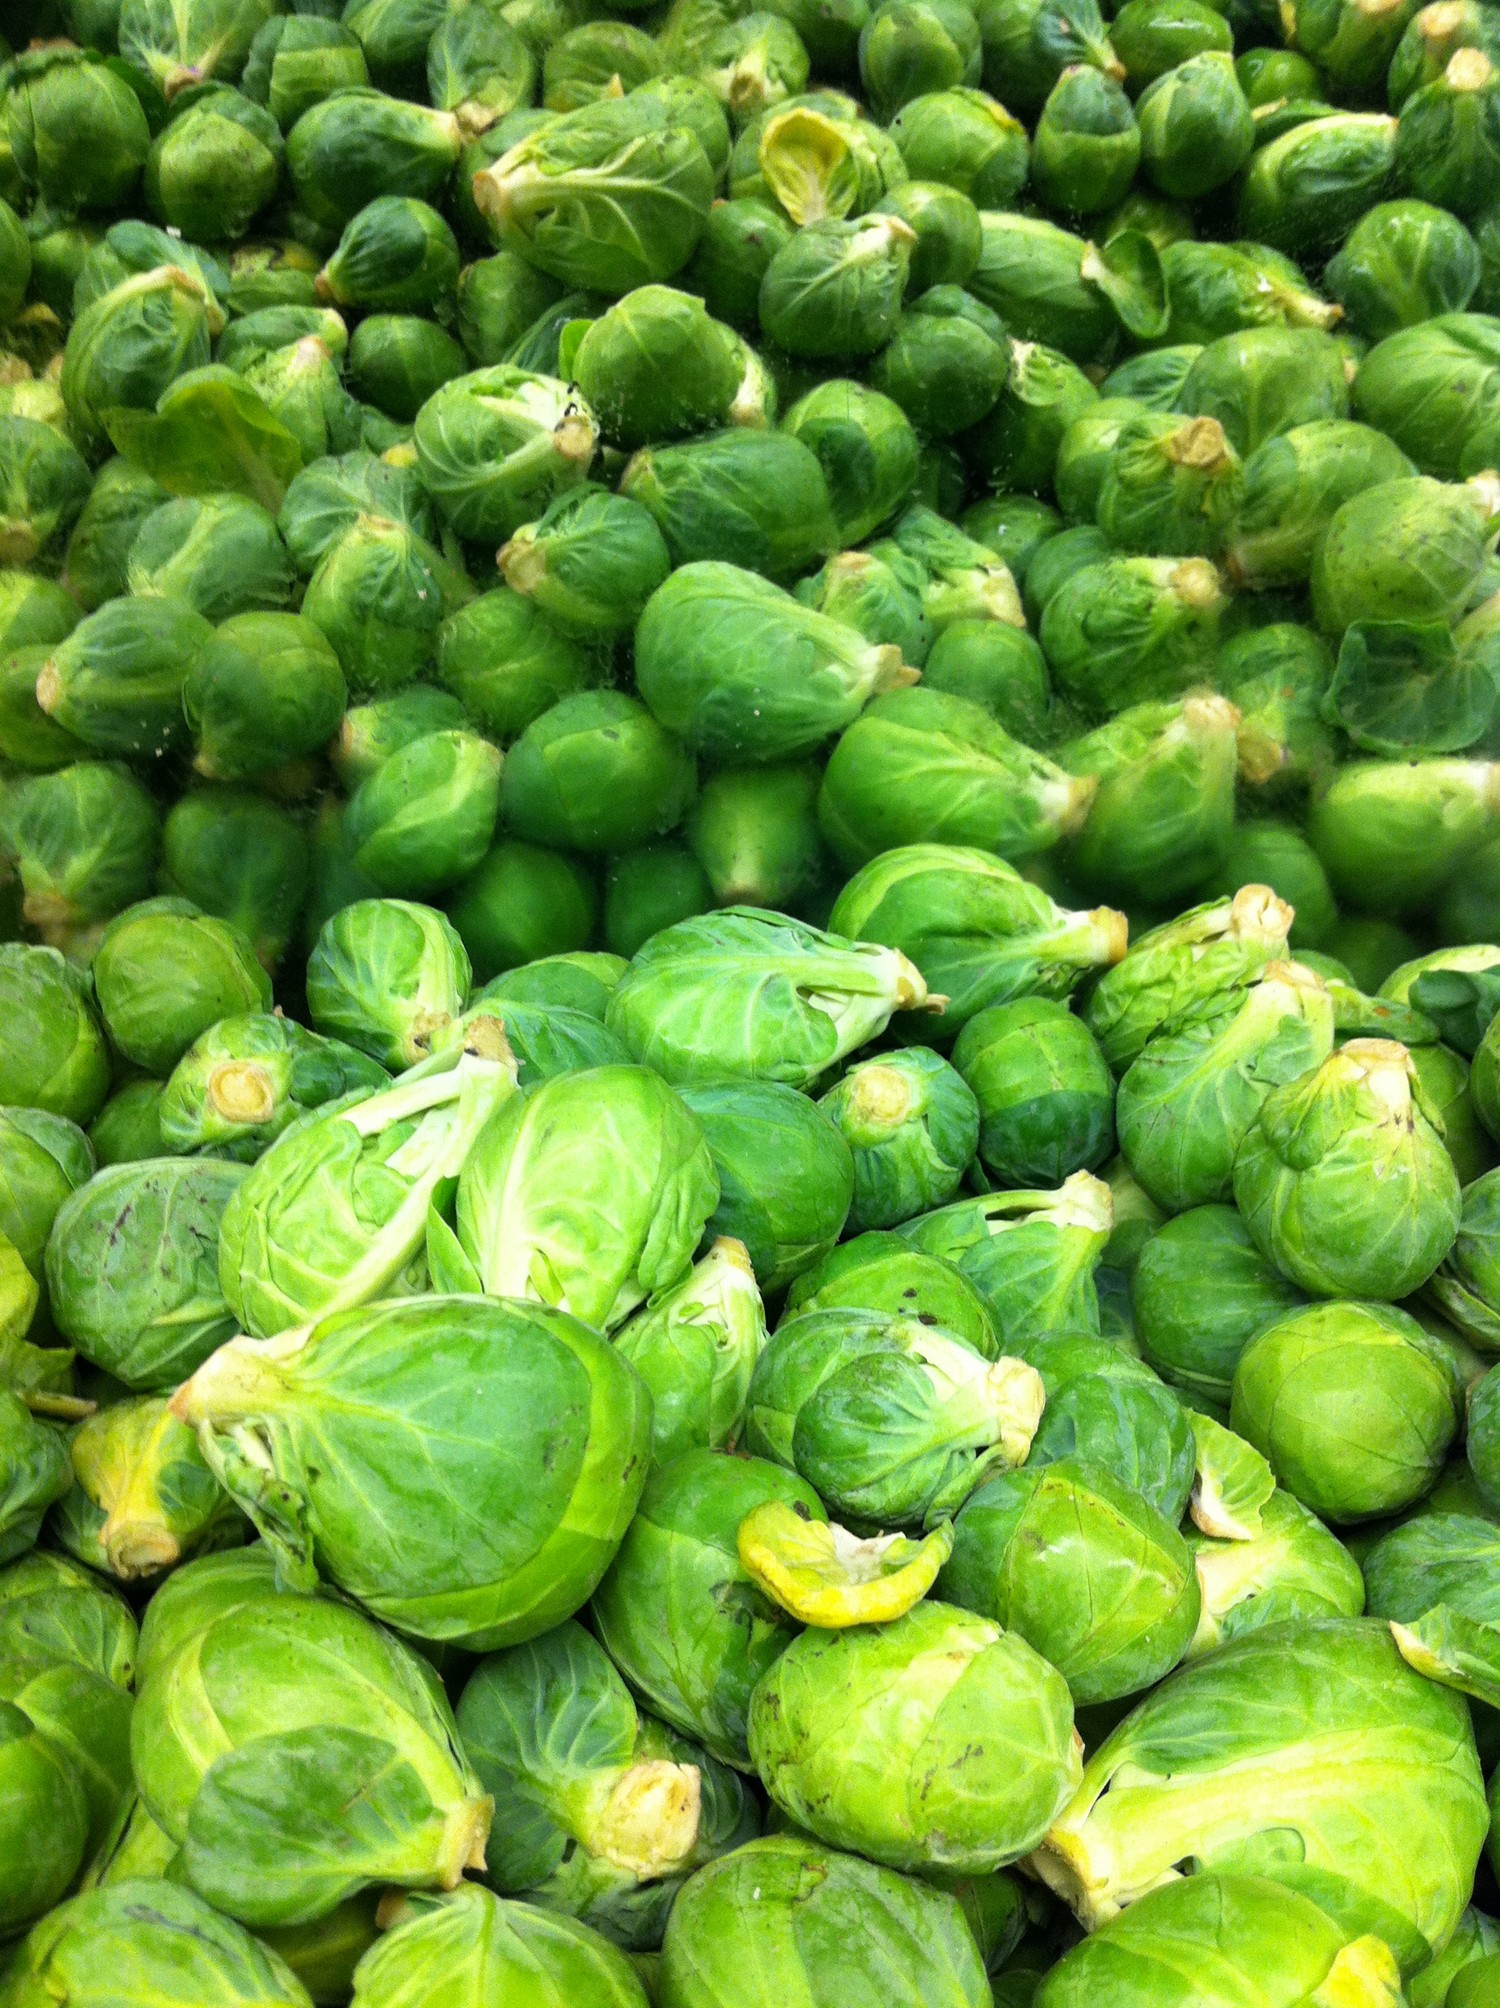 Brussels sprouts - PHOTO BY BOB DORAN